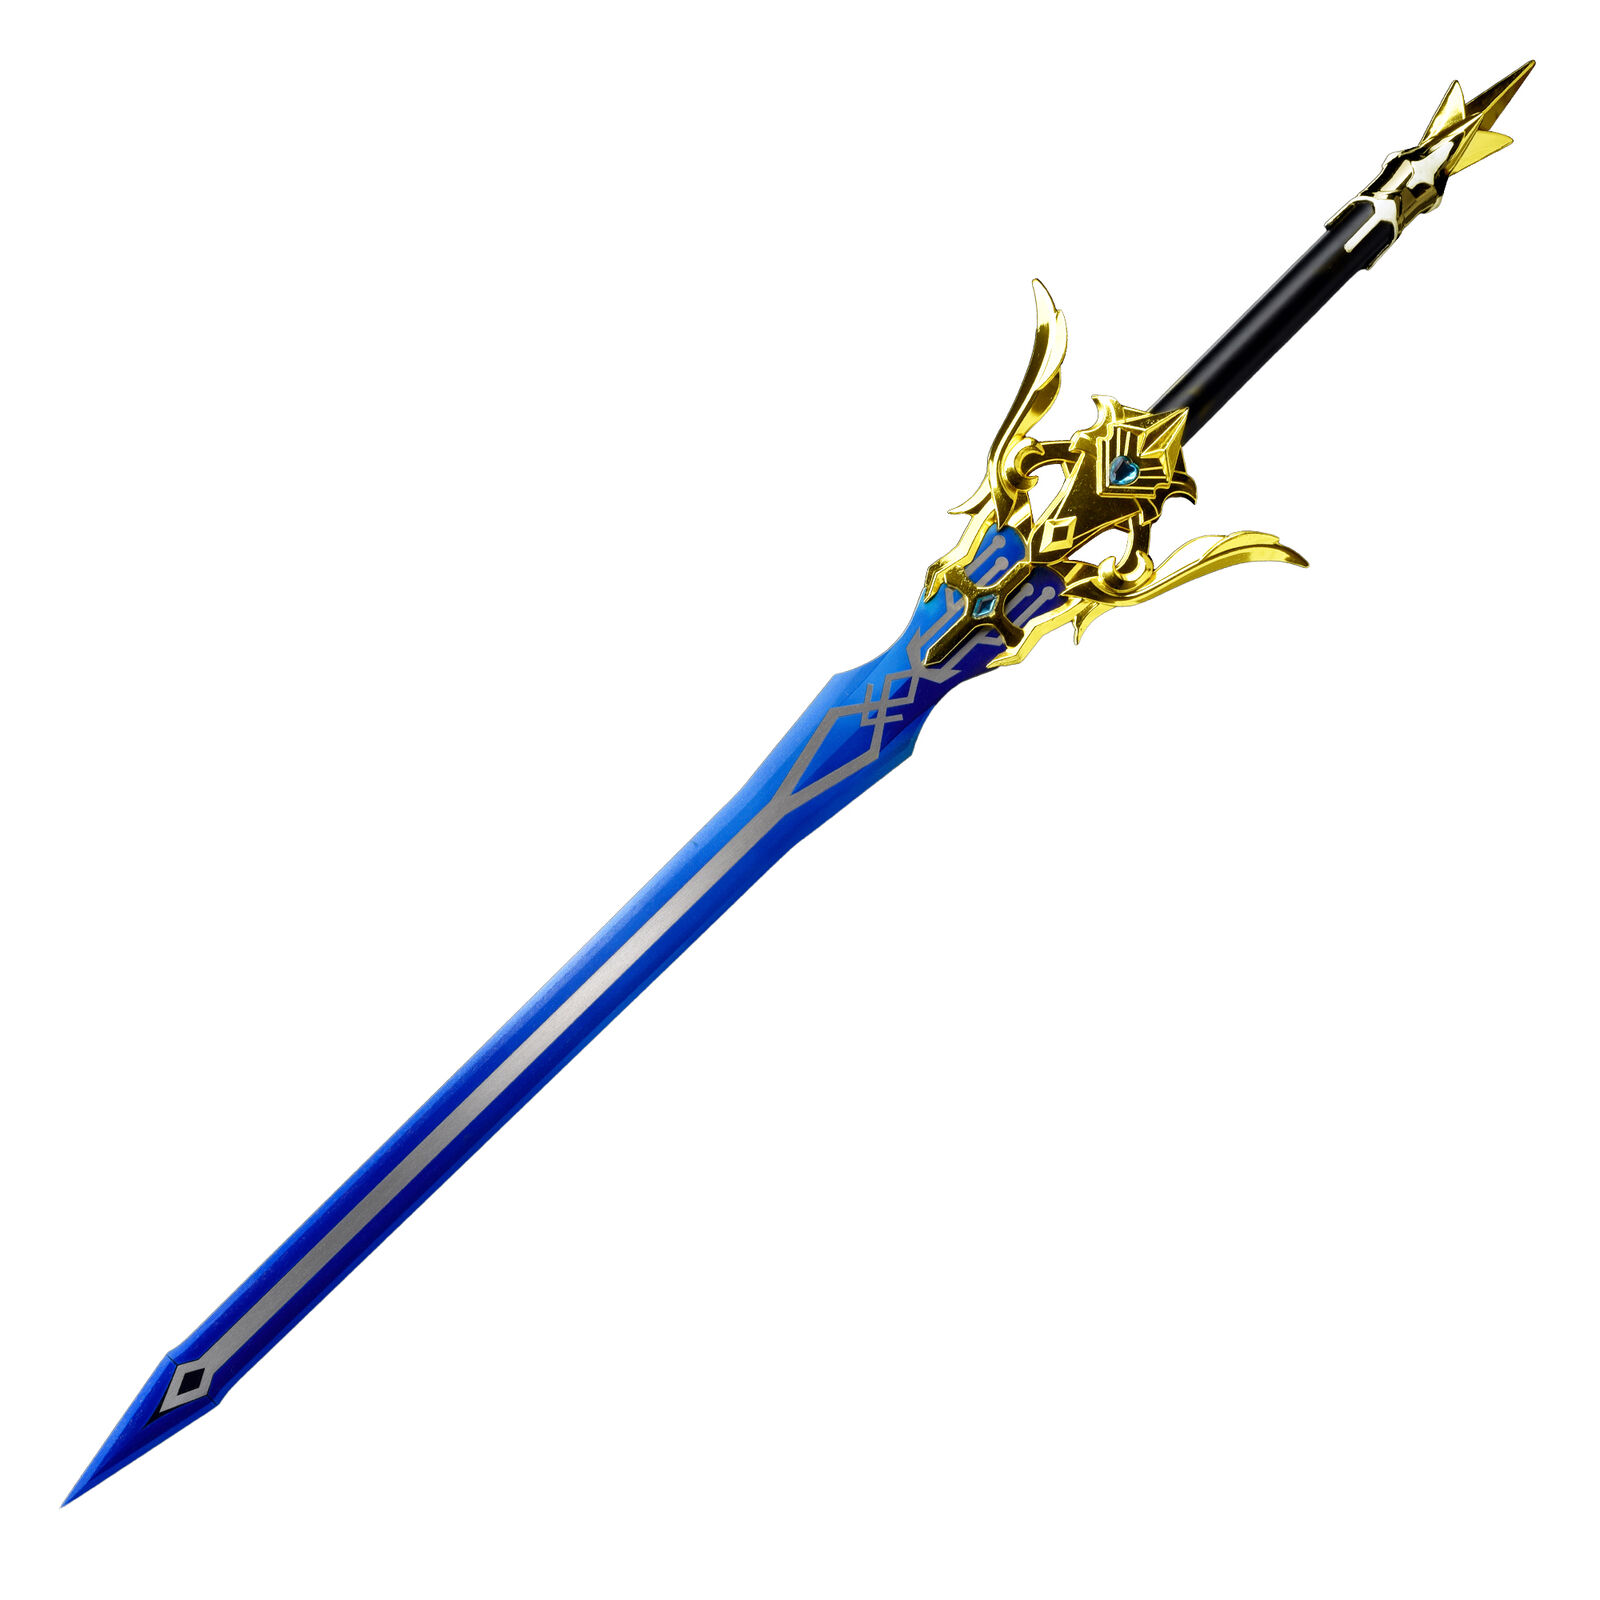 Game Fantacy GENSHIN IMPACT ANIME SWORD Metal Cosplay Weapon - New Collection